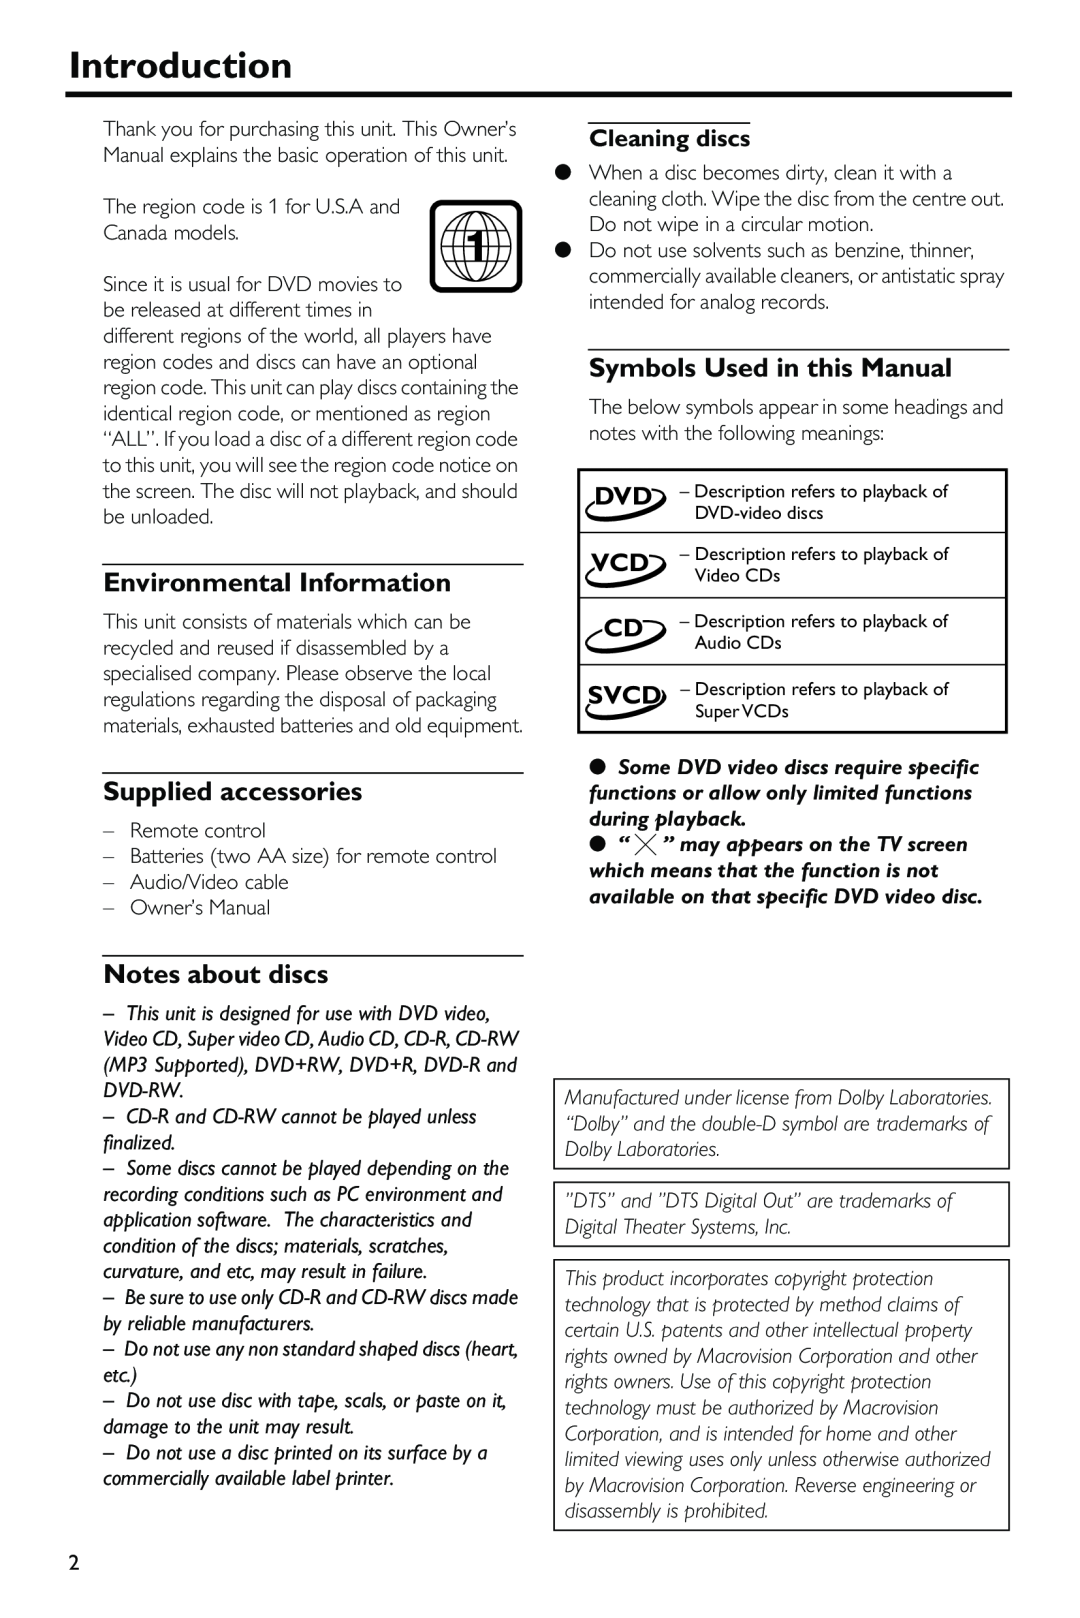 Yamaha HTR-5630RDS Introduction, Symbols Used in this Manual, Environmental Information, Supplied accessories, Svcd 